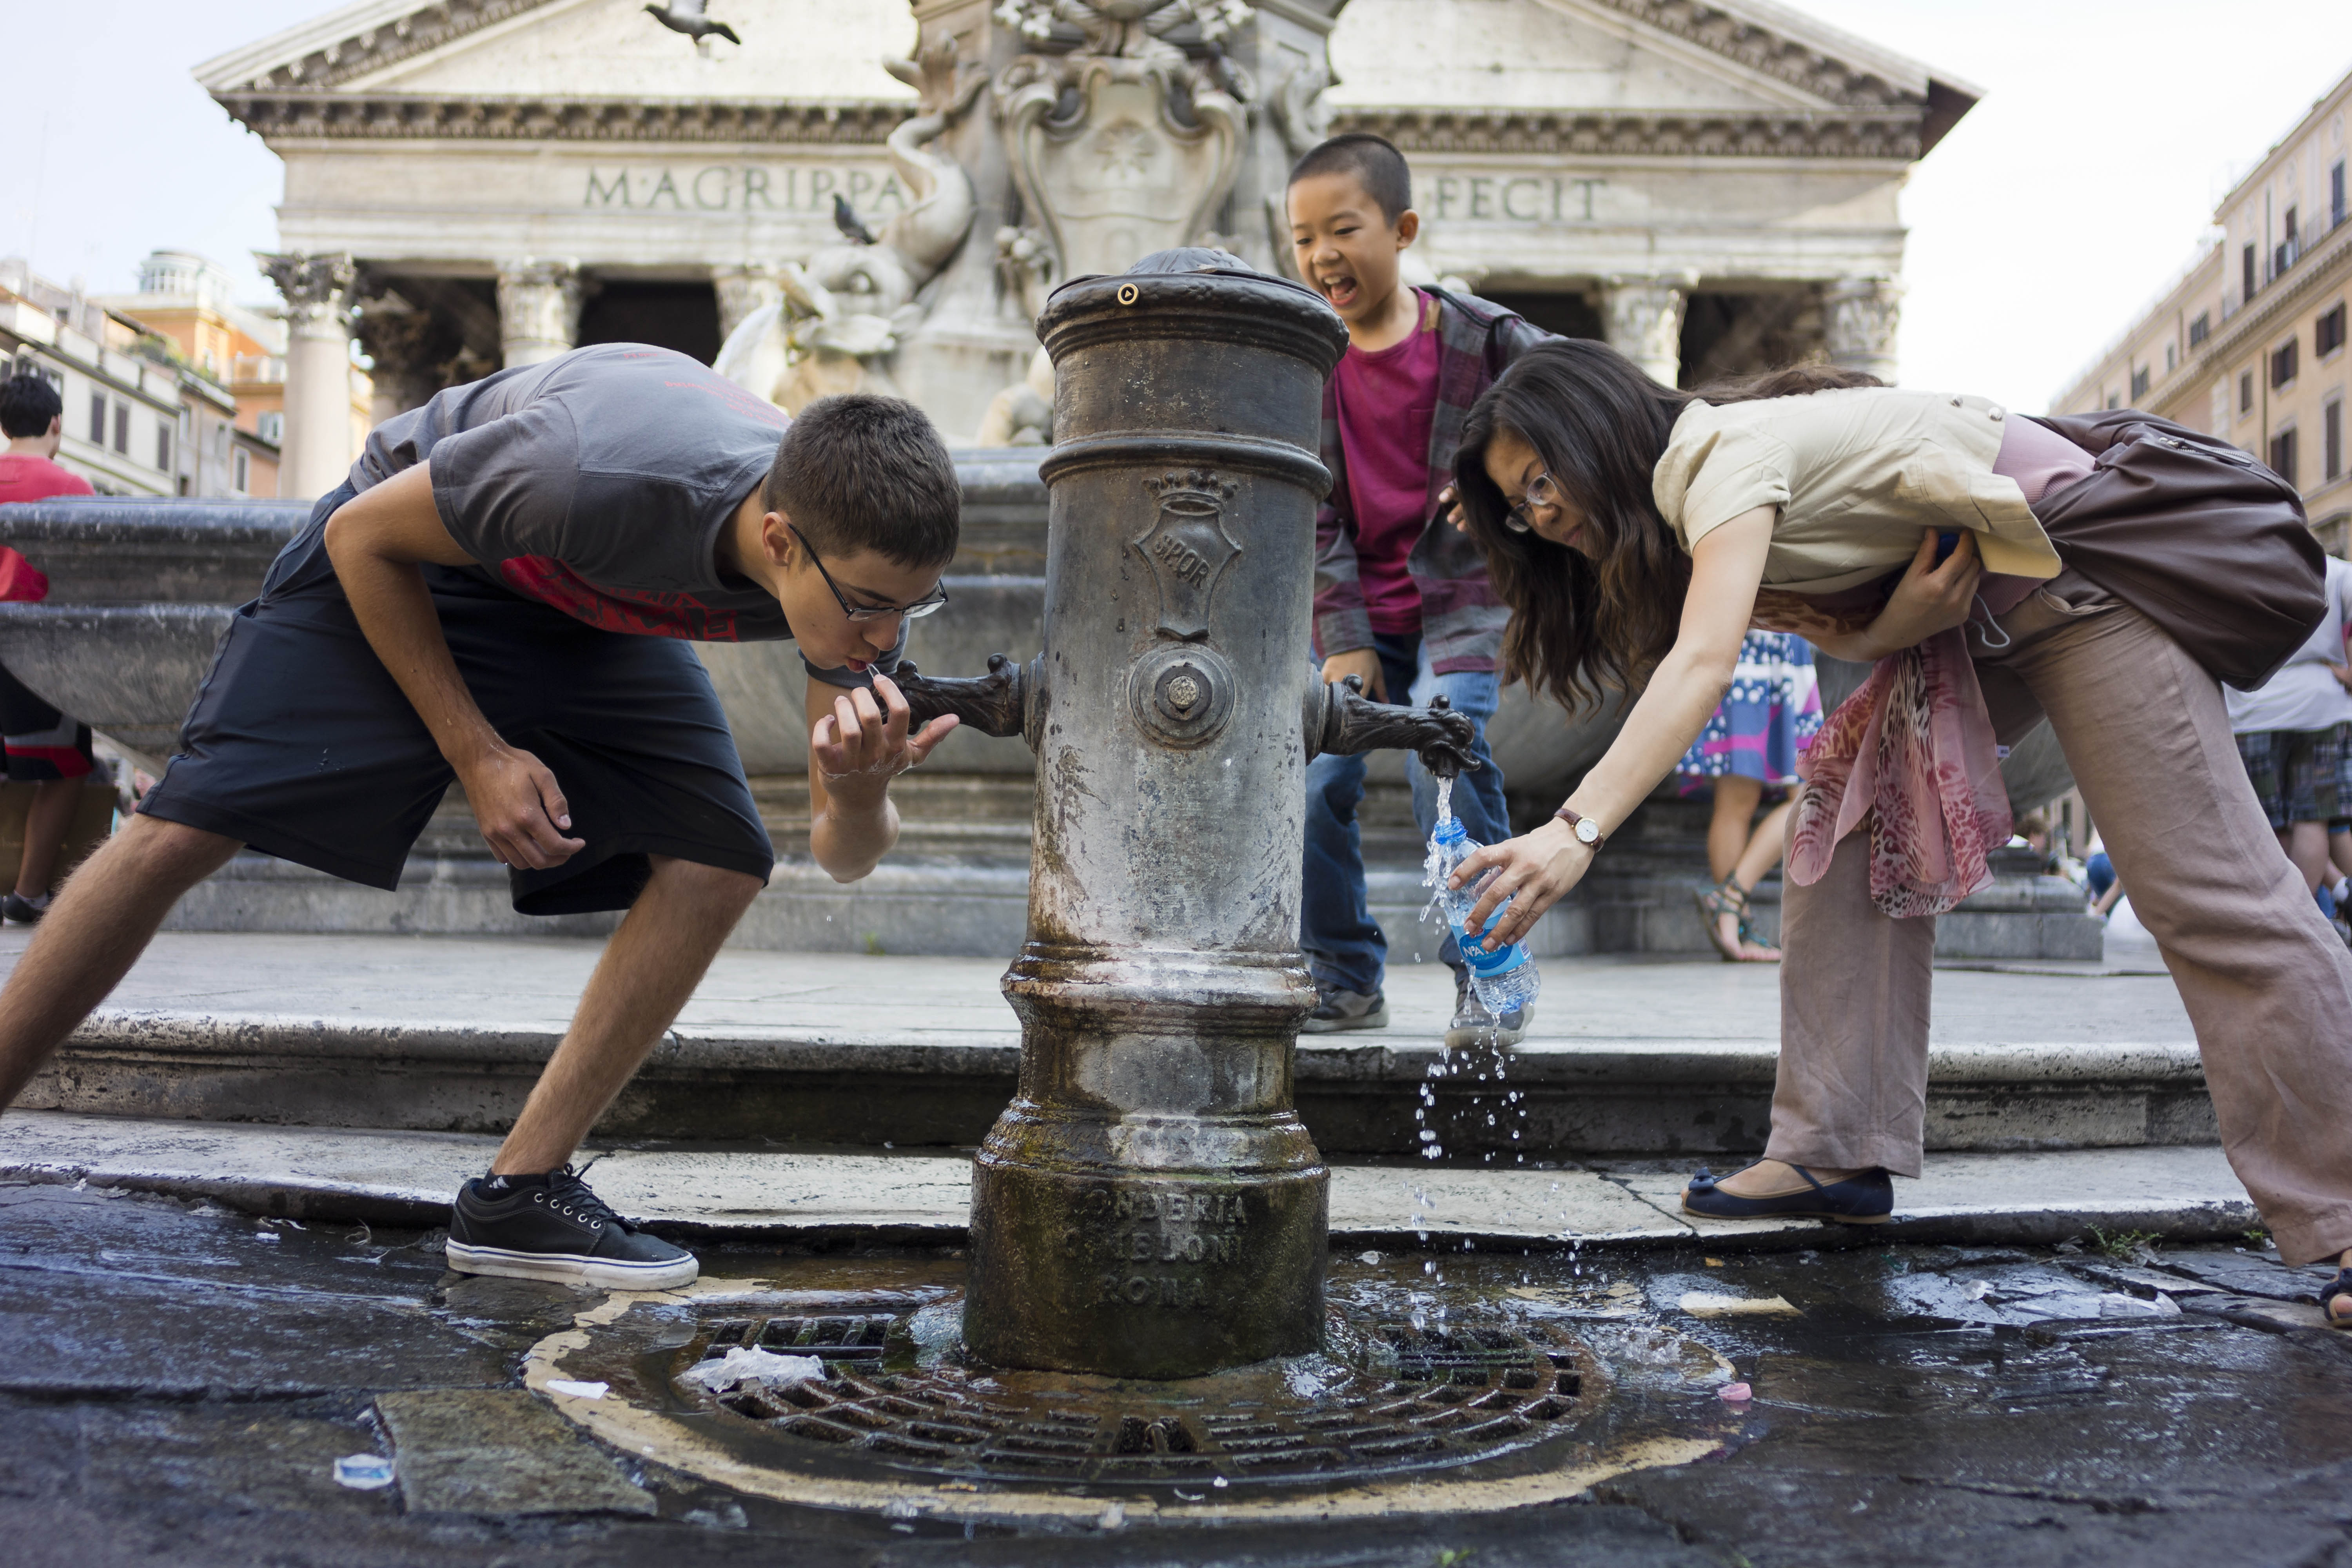 Tourists refresh at a typical Roman fountain (Nasone) in front of  Rome's Pantheon, Thursday, June 27, 2013. The Rome's Pantheon was  built under Roman Emperor Augustus between 27-25 BC to celebrate all Gods worshipped in ancient Rome and rebuilt under Emperor Adrian between 118 and 128 AD. The dome's central opening (Oculus) creates a beam of light that reflects on the temple's marble floor. ( AP Photo/Domenico Stinellis)